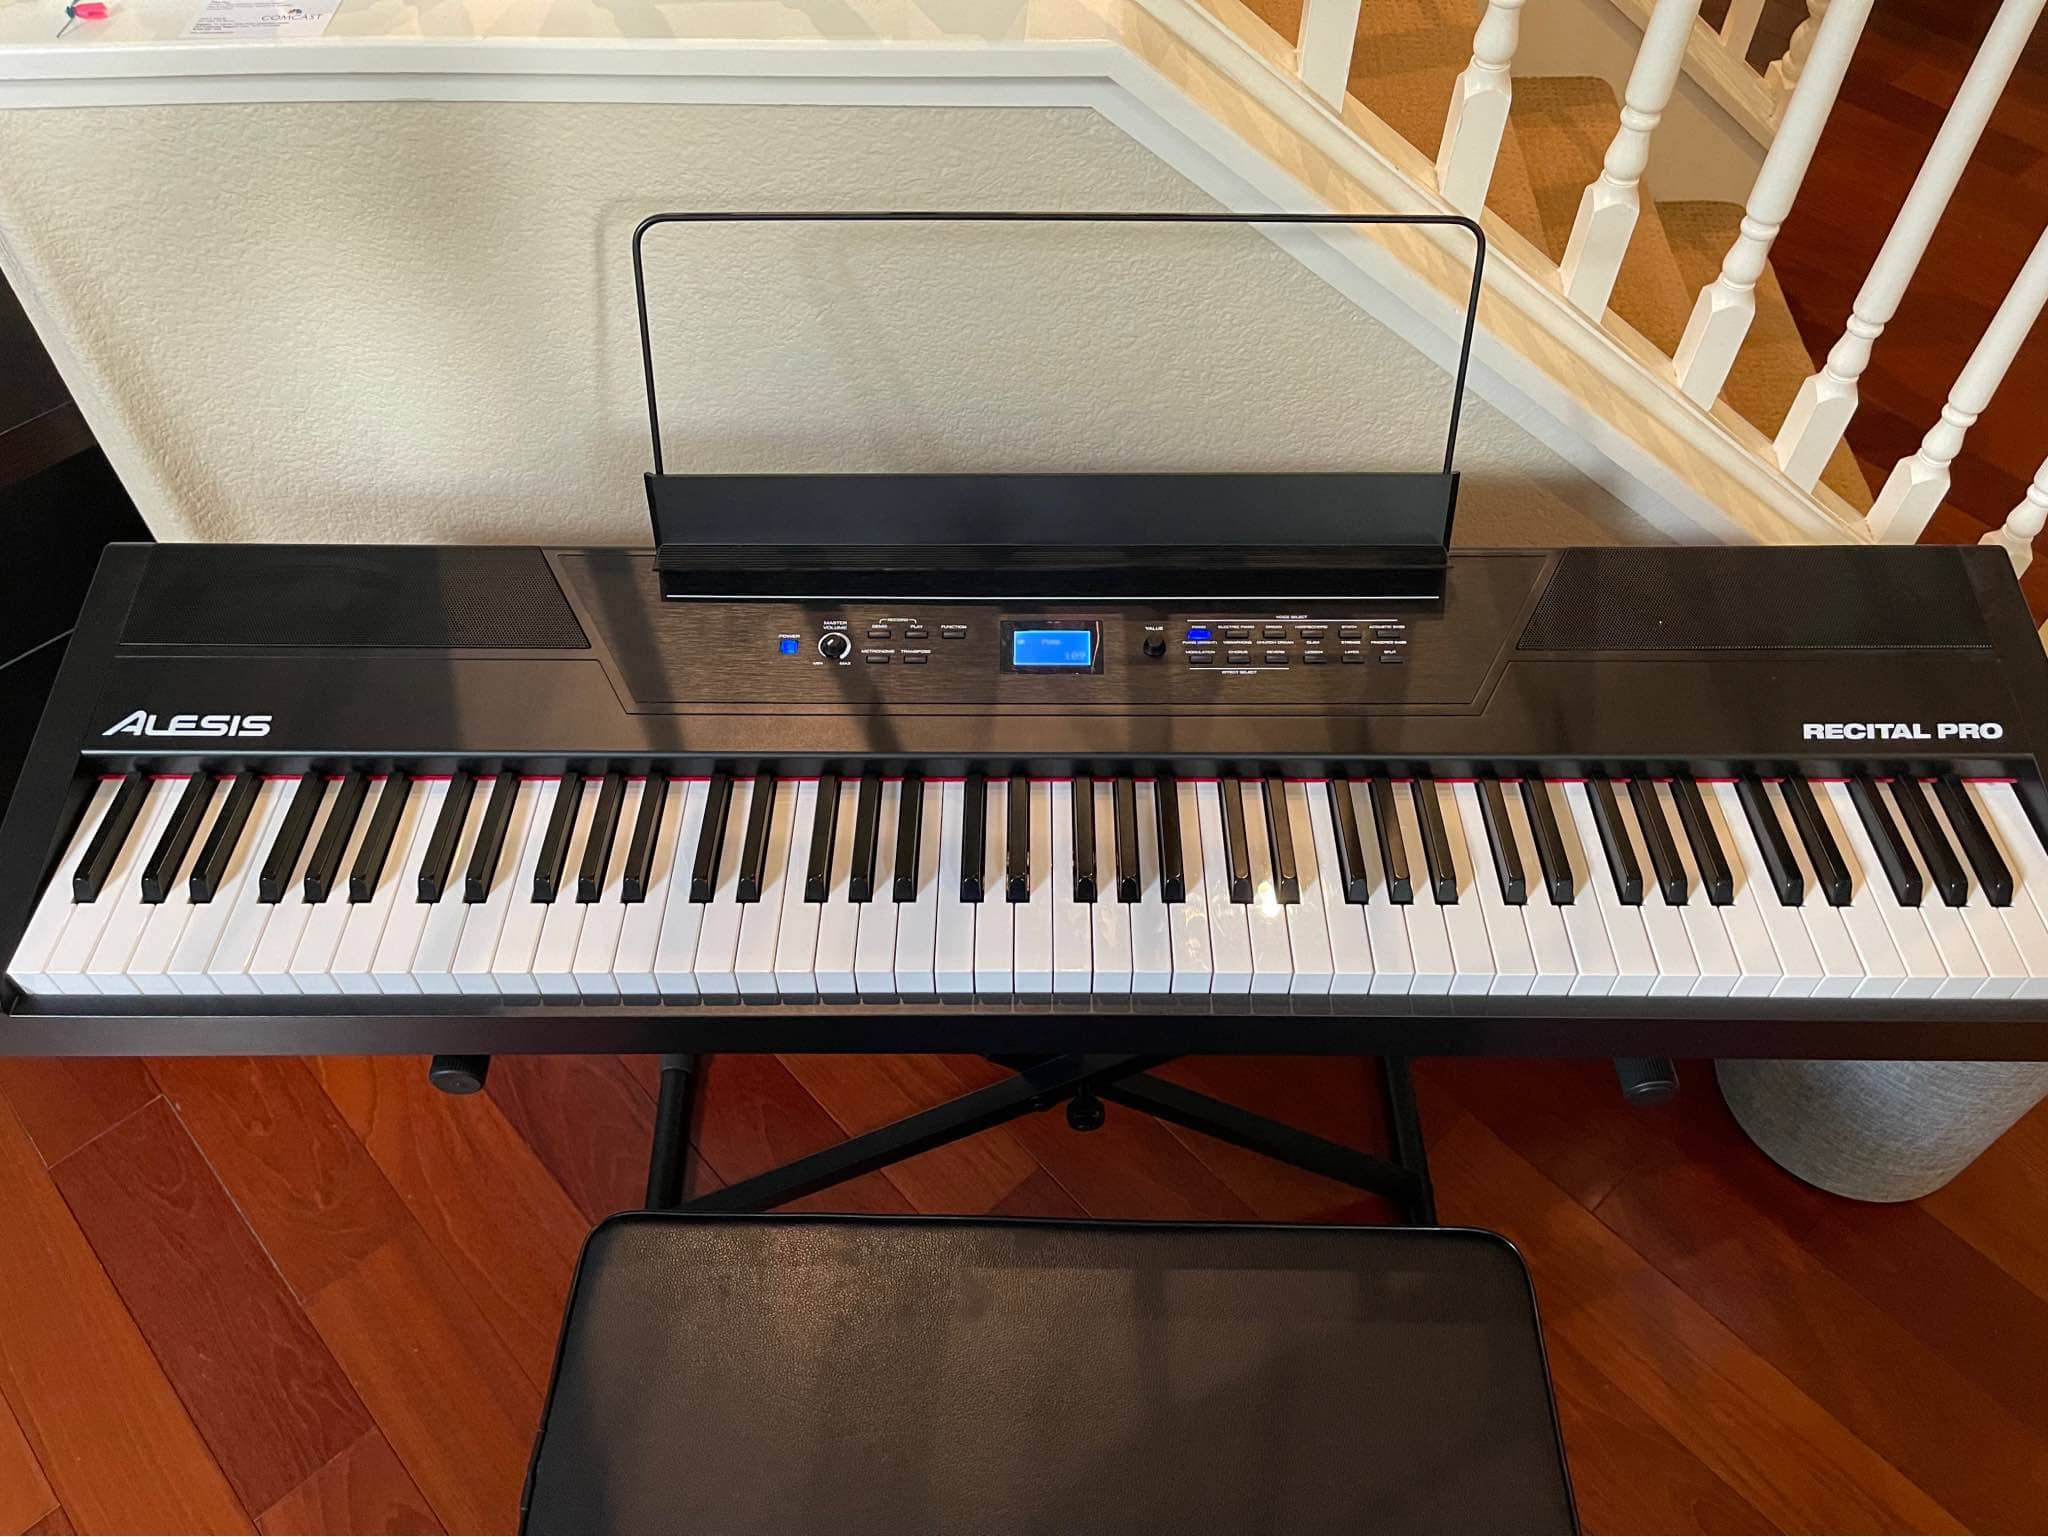 The Alesis Recital Pro features richer and brighter tones